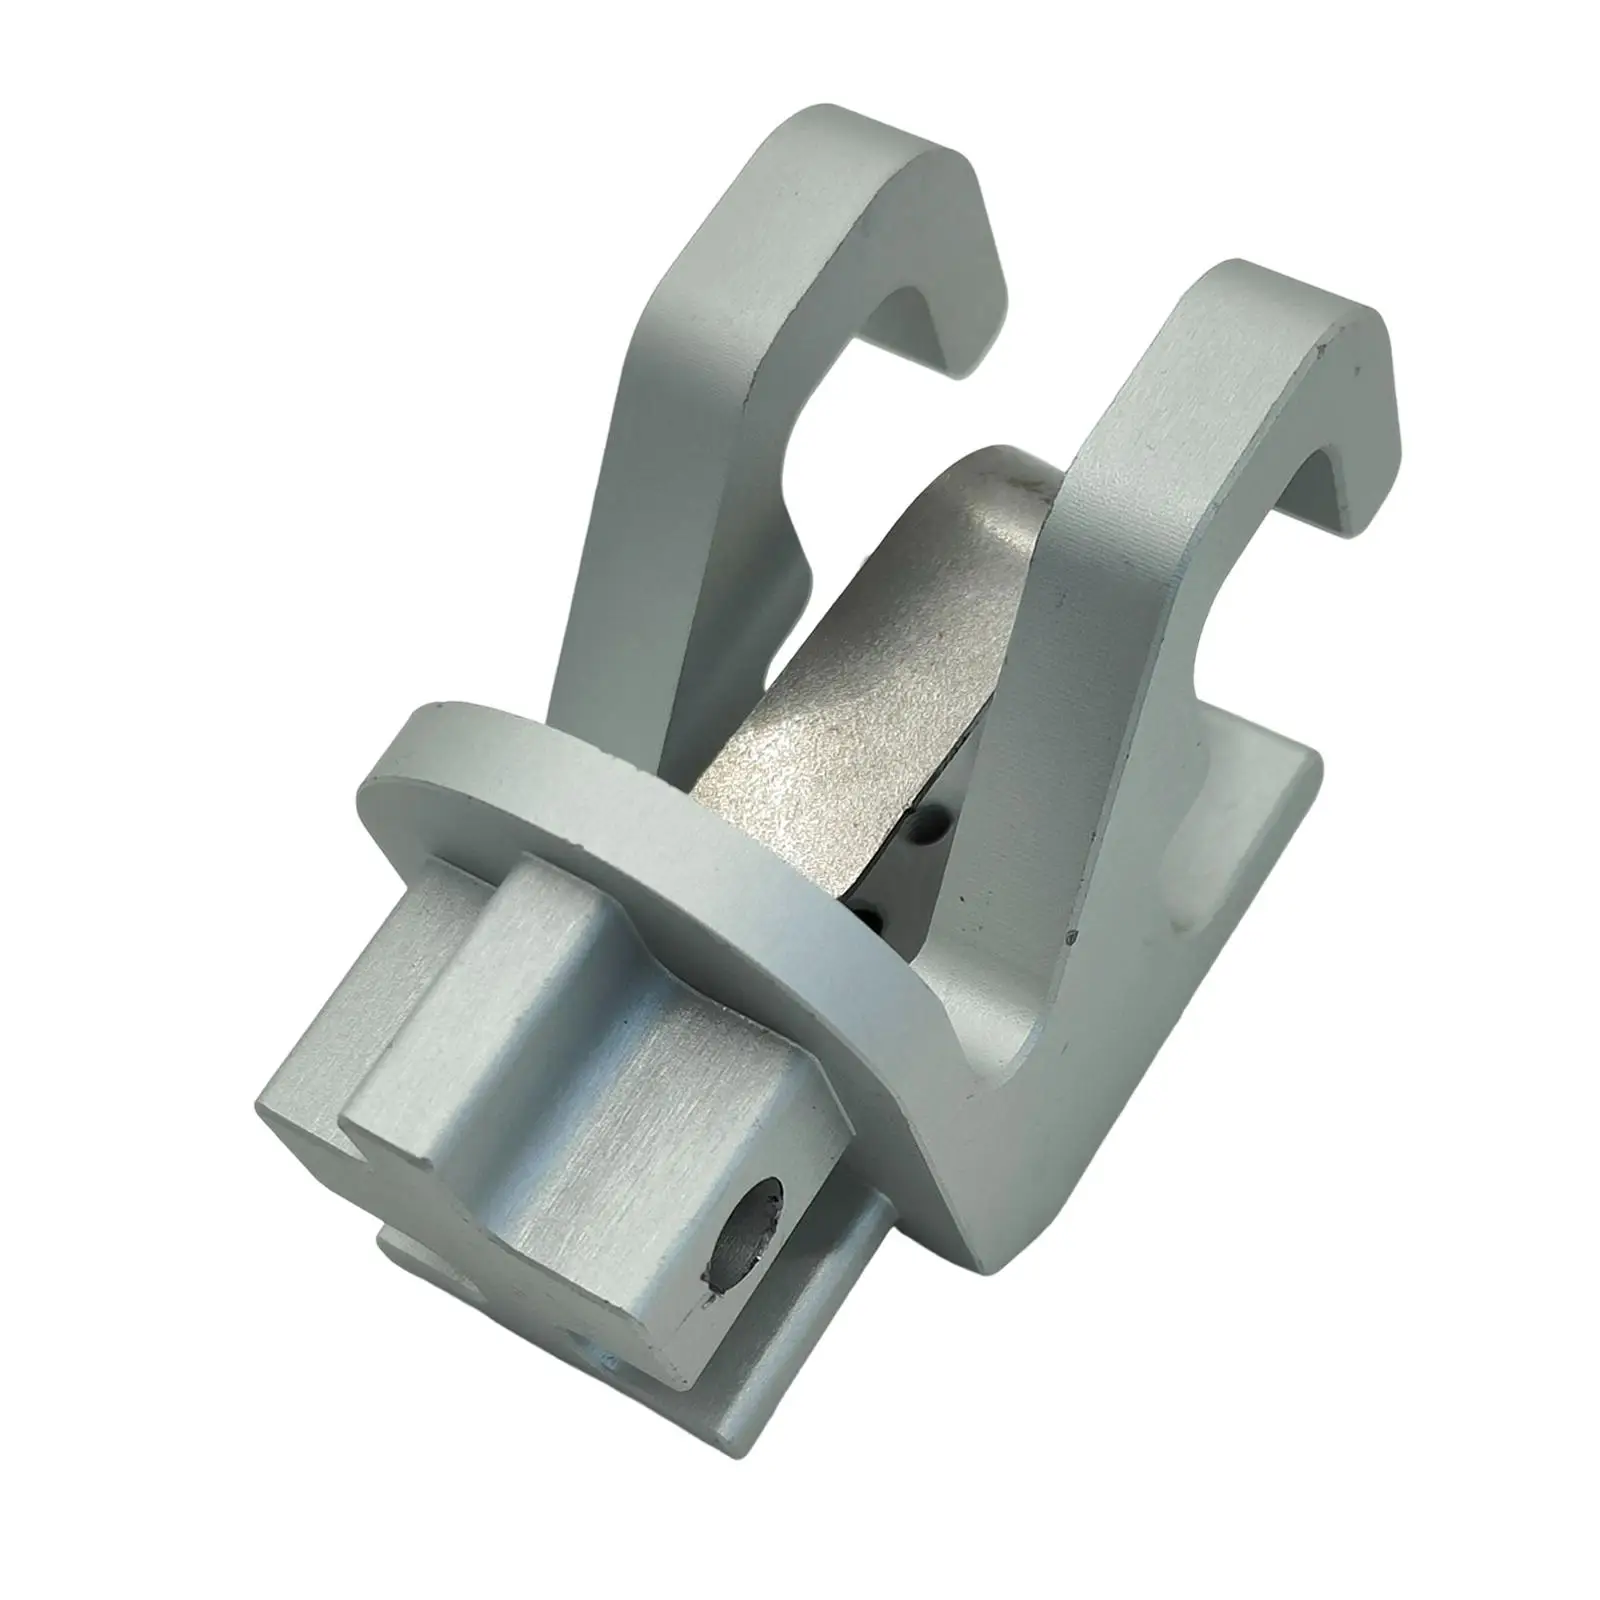 Lower Rafter Claw, Satin Aluminum Fit for II Awning Sturdy Heavy Duty Premium